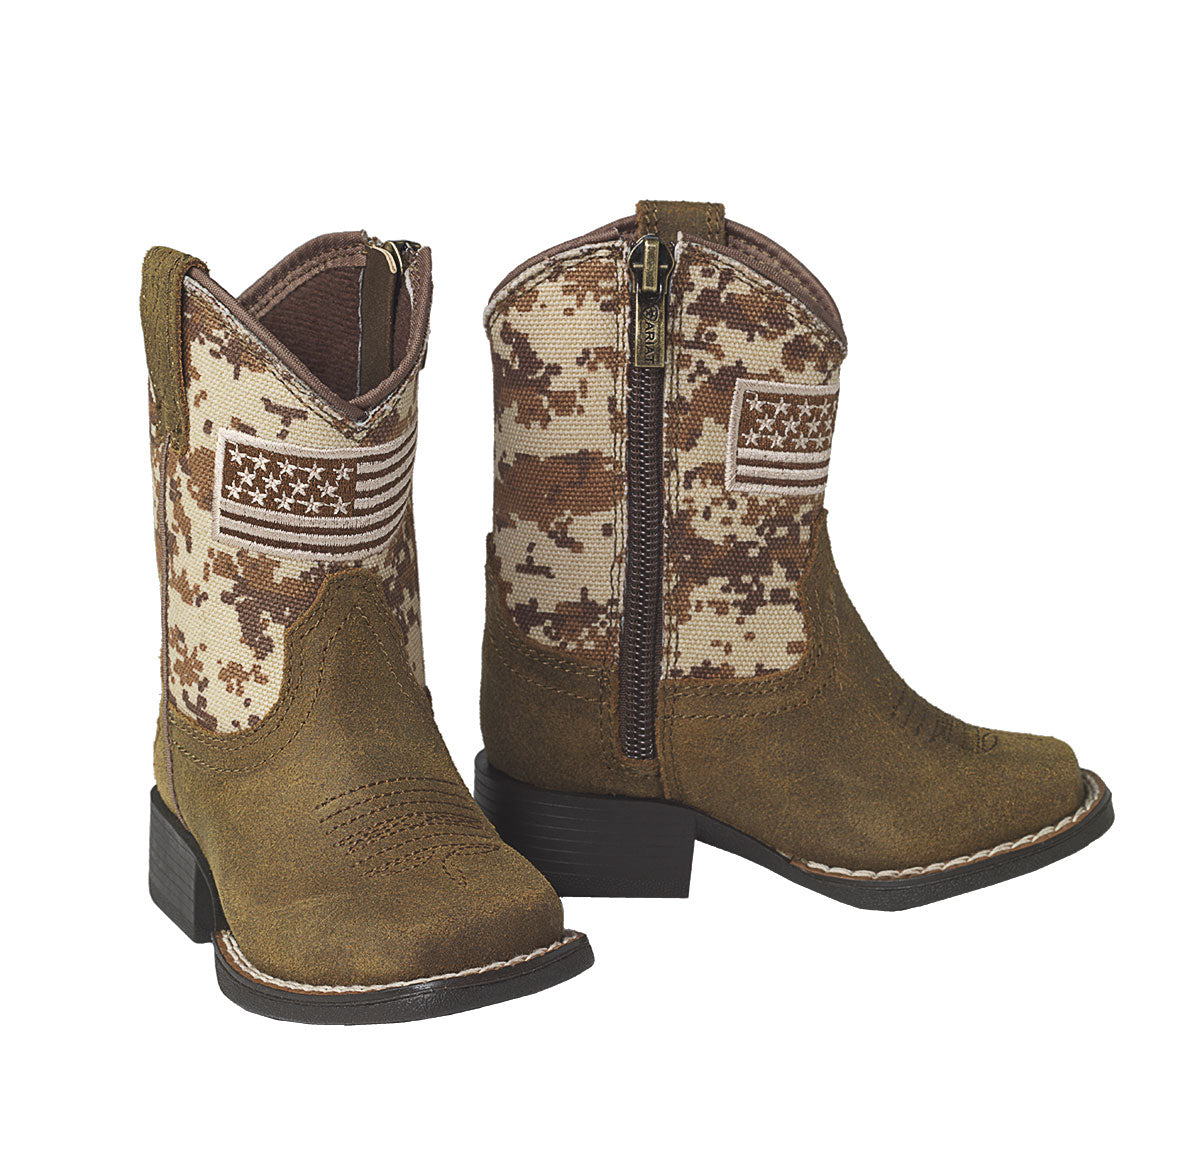 Ariat Lil' Stompers Patriot Boot